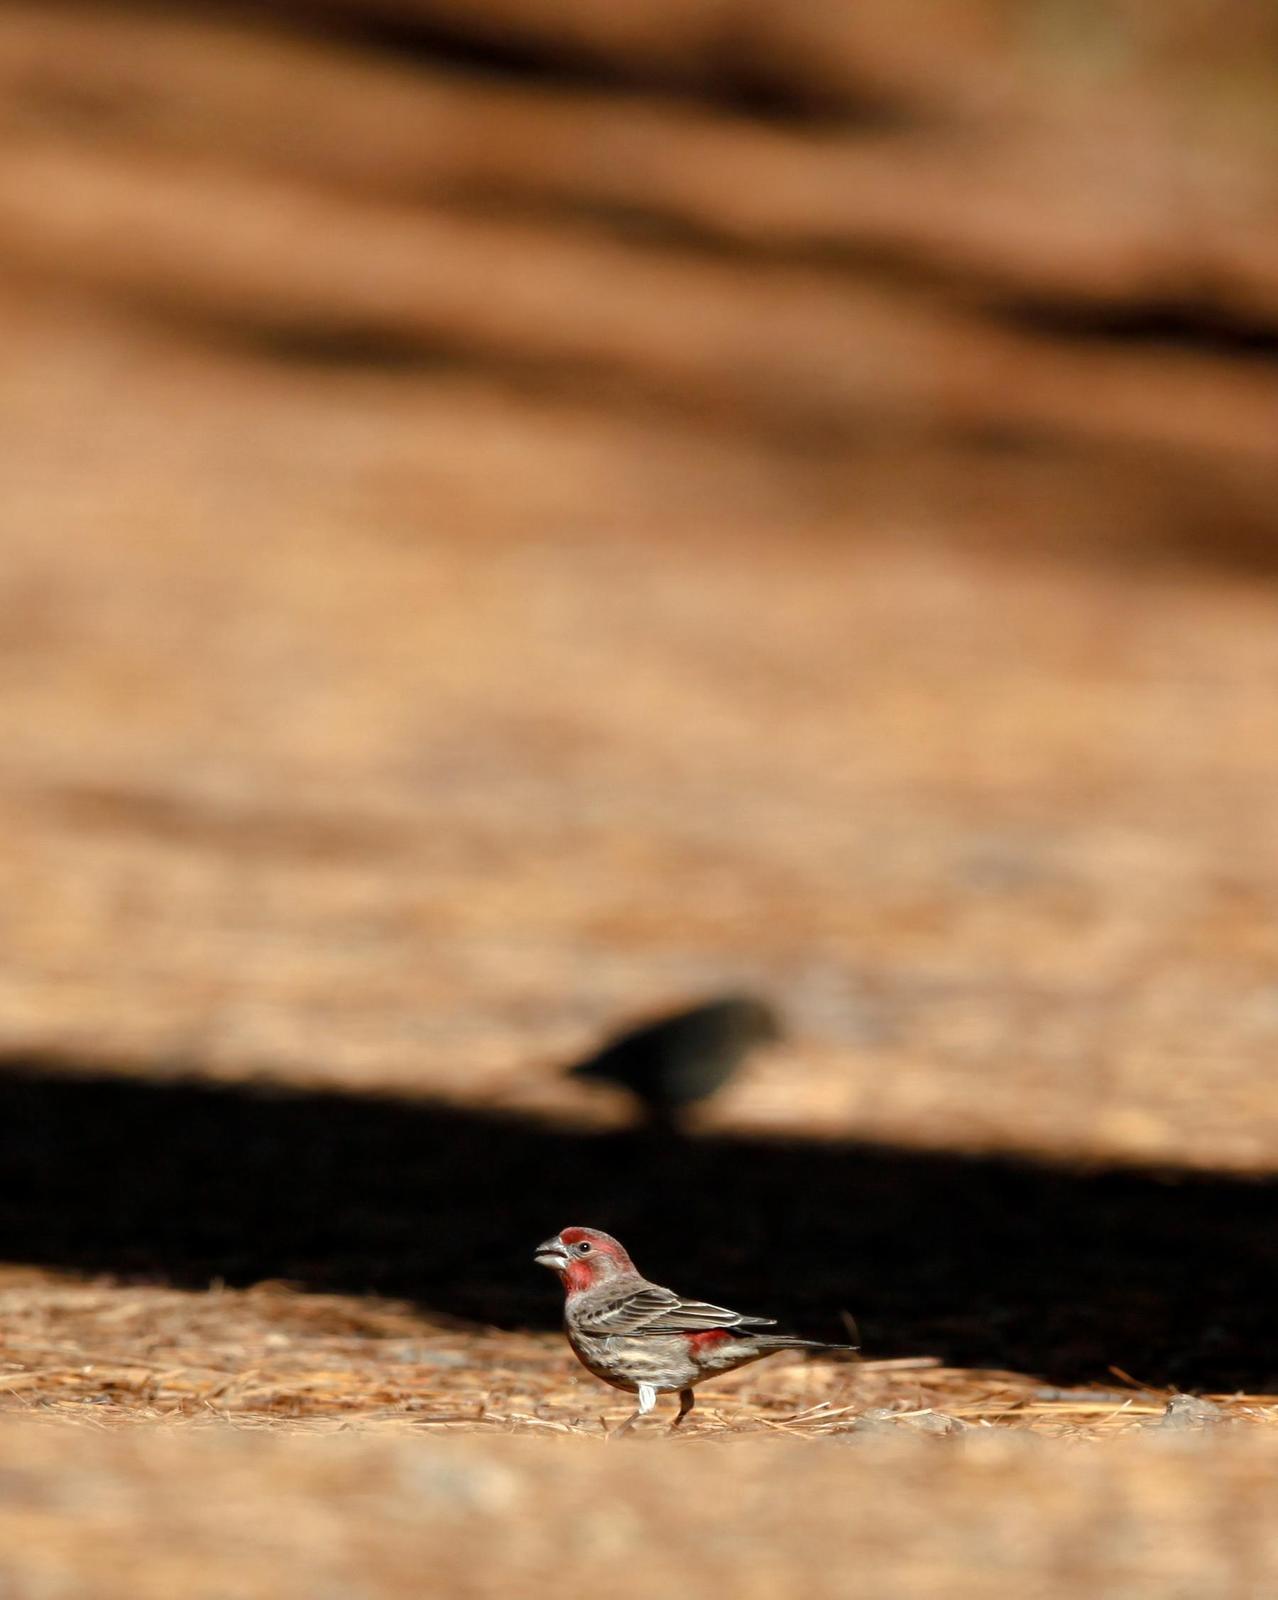 House Finch Photo by Lucy Wightman